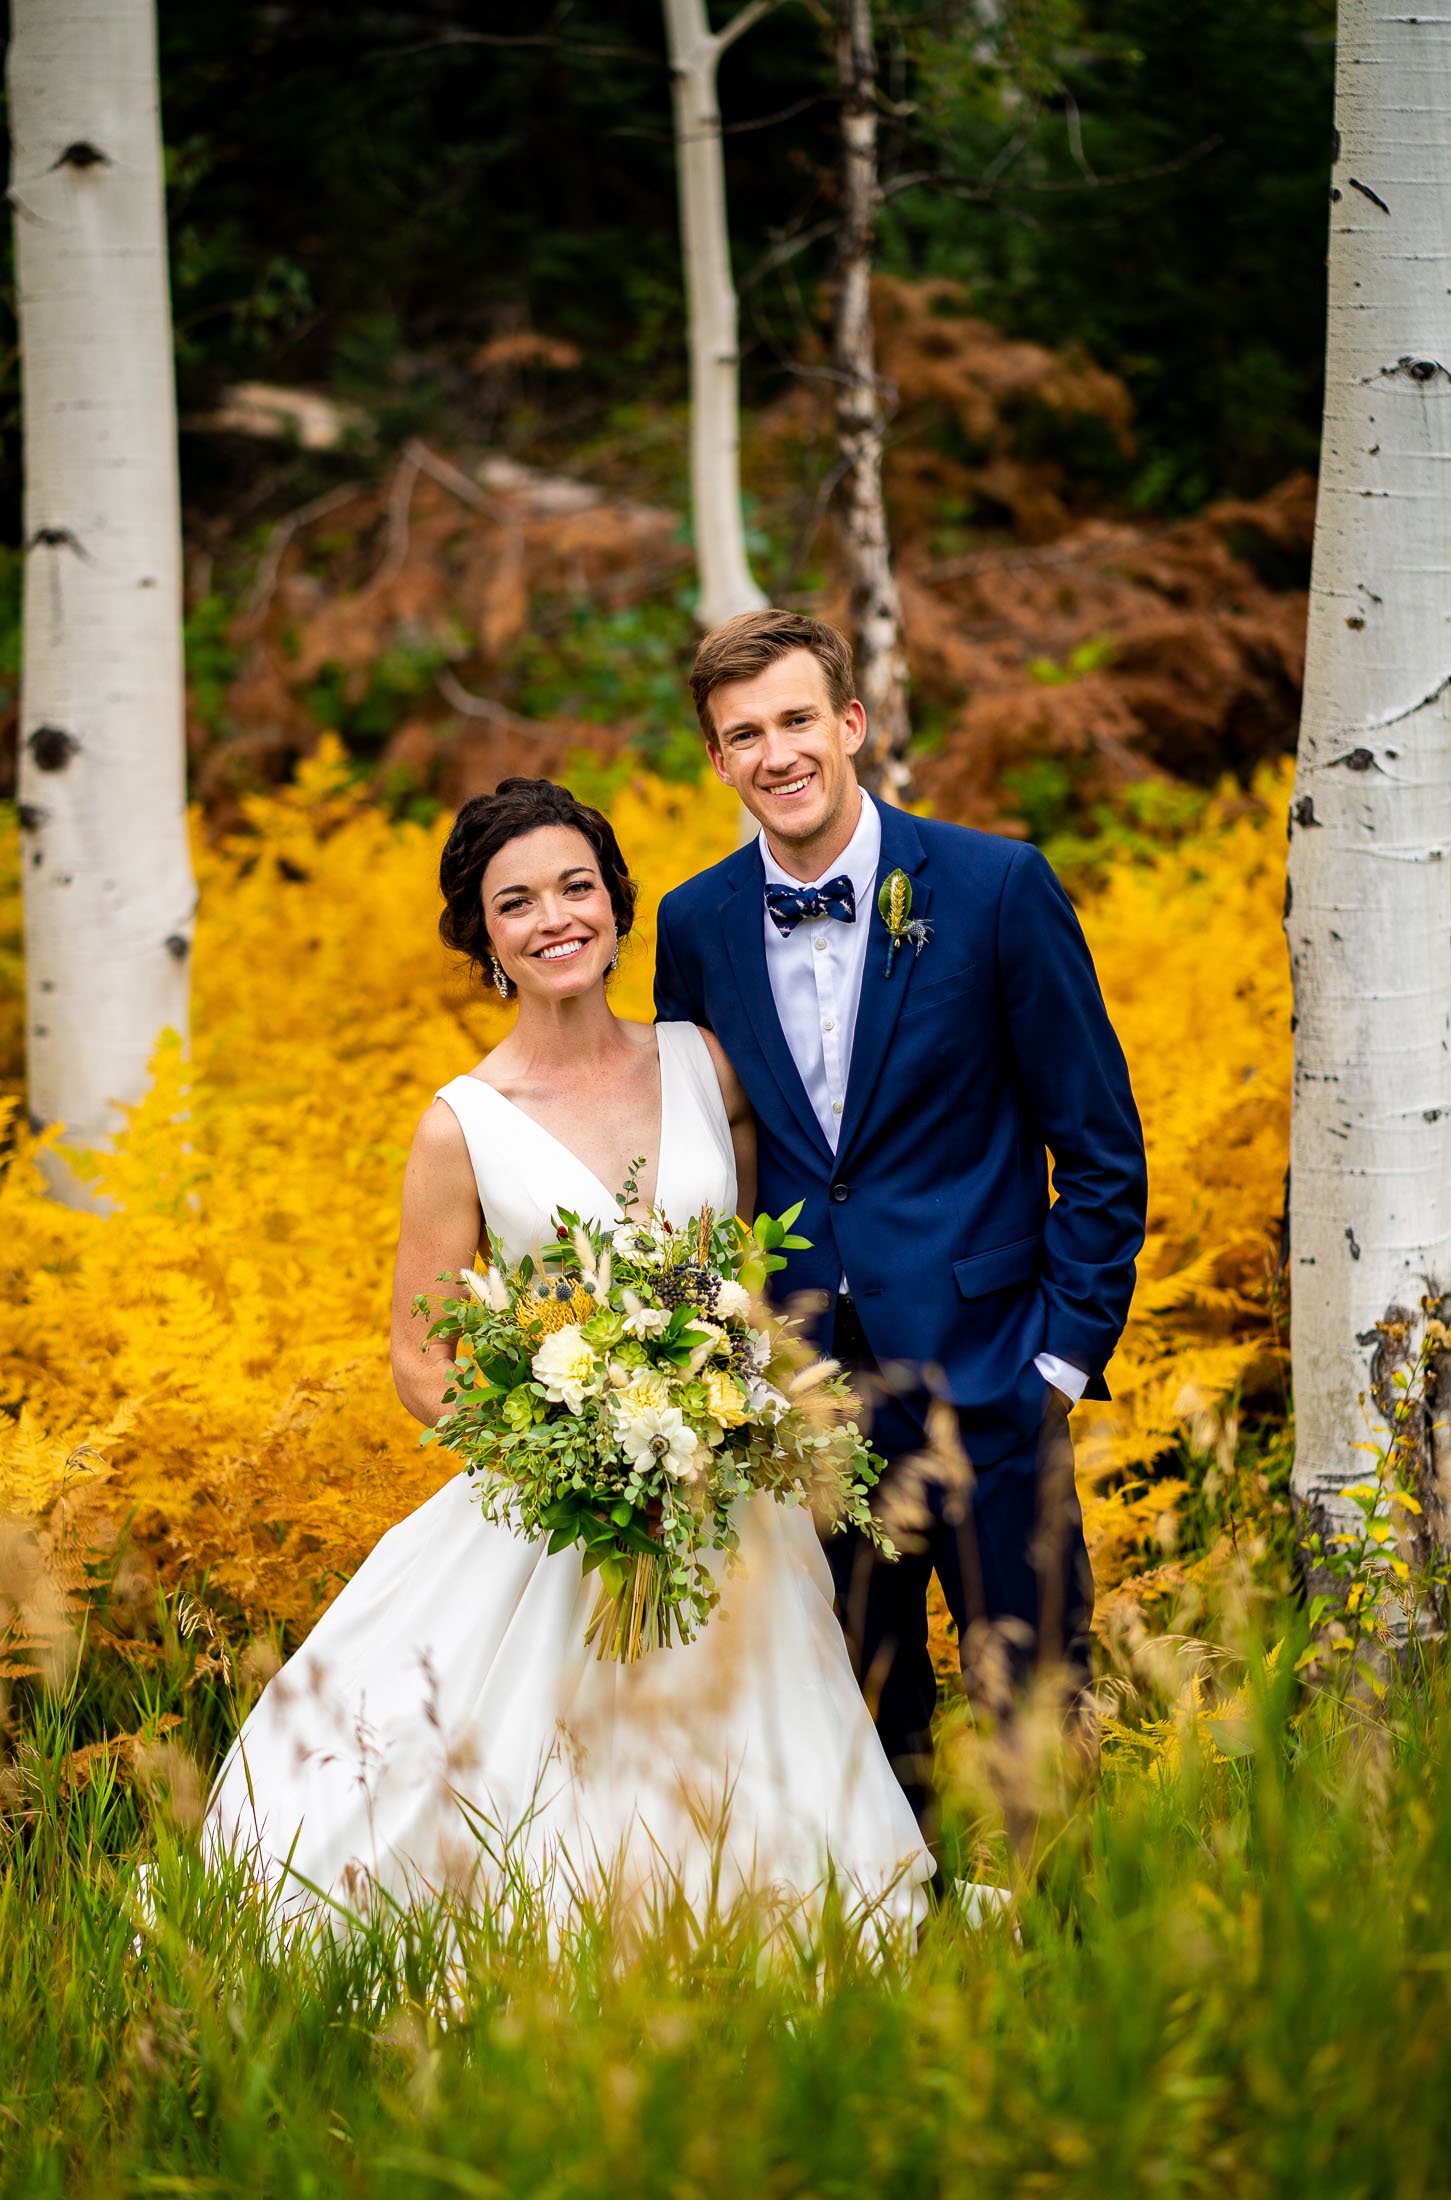 Bride and groom pose for a portrait in a field of golden ferns surrounded by aspens in a meadow, wedding, wedding photos, wedding photography, wedding photographer, wedding inspiration, wedding photo inspiration, wedding portraits, wedding ceremony, wedding reception, mountain wedding, Catholic Church wedding, Catholic Church wedding photos, Catholic Church wedding photography, Catholic Church wedding photographer, Catholic Church wedding inspiration, Catholic Church wedding venue, Steamboat Springs wedding, Steamboat Springs wedding photos, Steamboat Springs wedding photography, Steamboat Springs wedding photographer, Colorado wedding, Colorado wedding photos, Colorado wedding photography, Colorado wedding photographer, Colorado mountain wedding, Colorado wedding inspiration